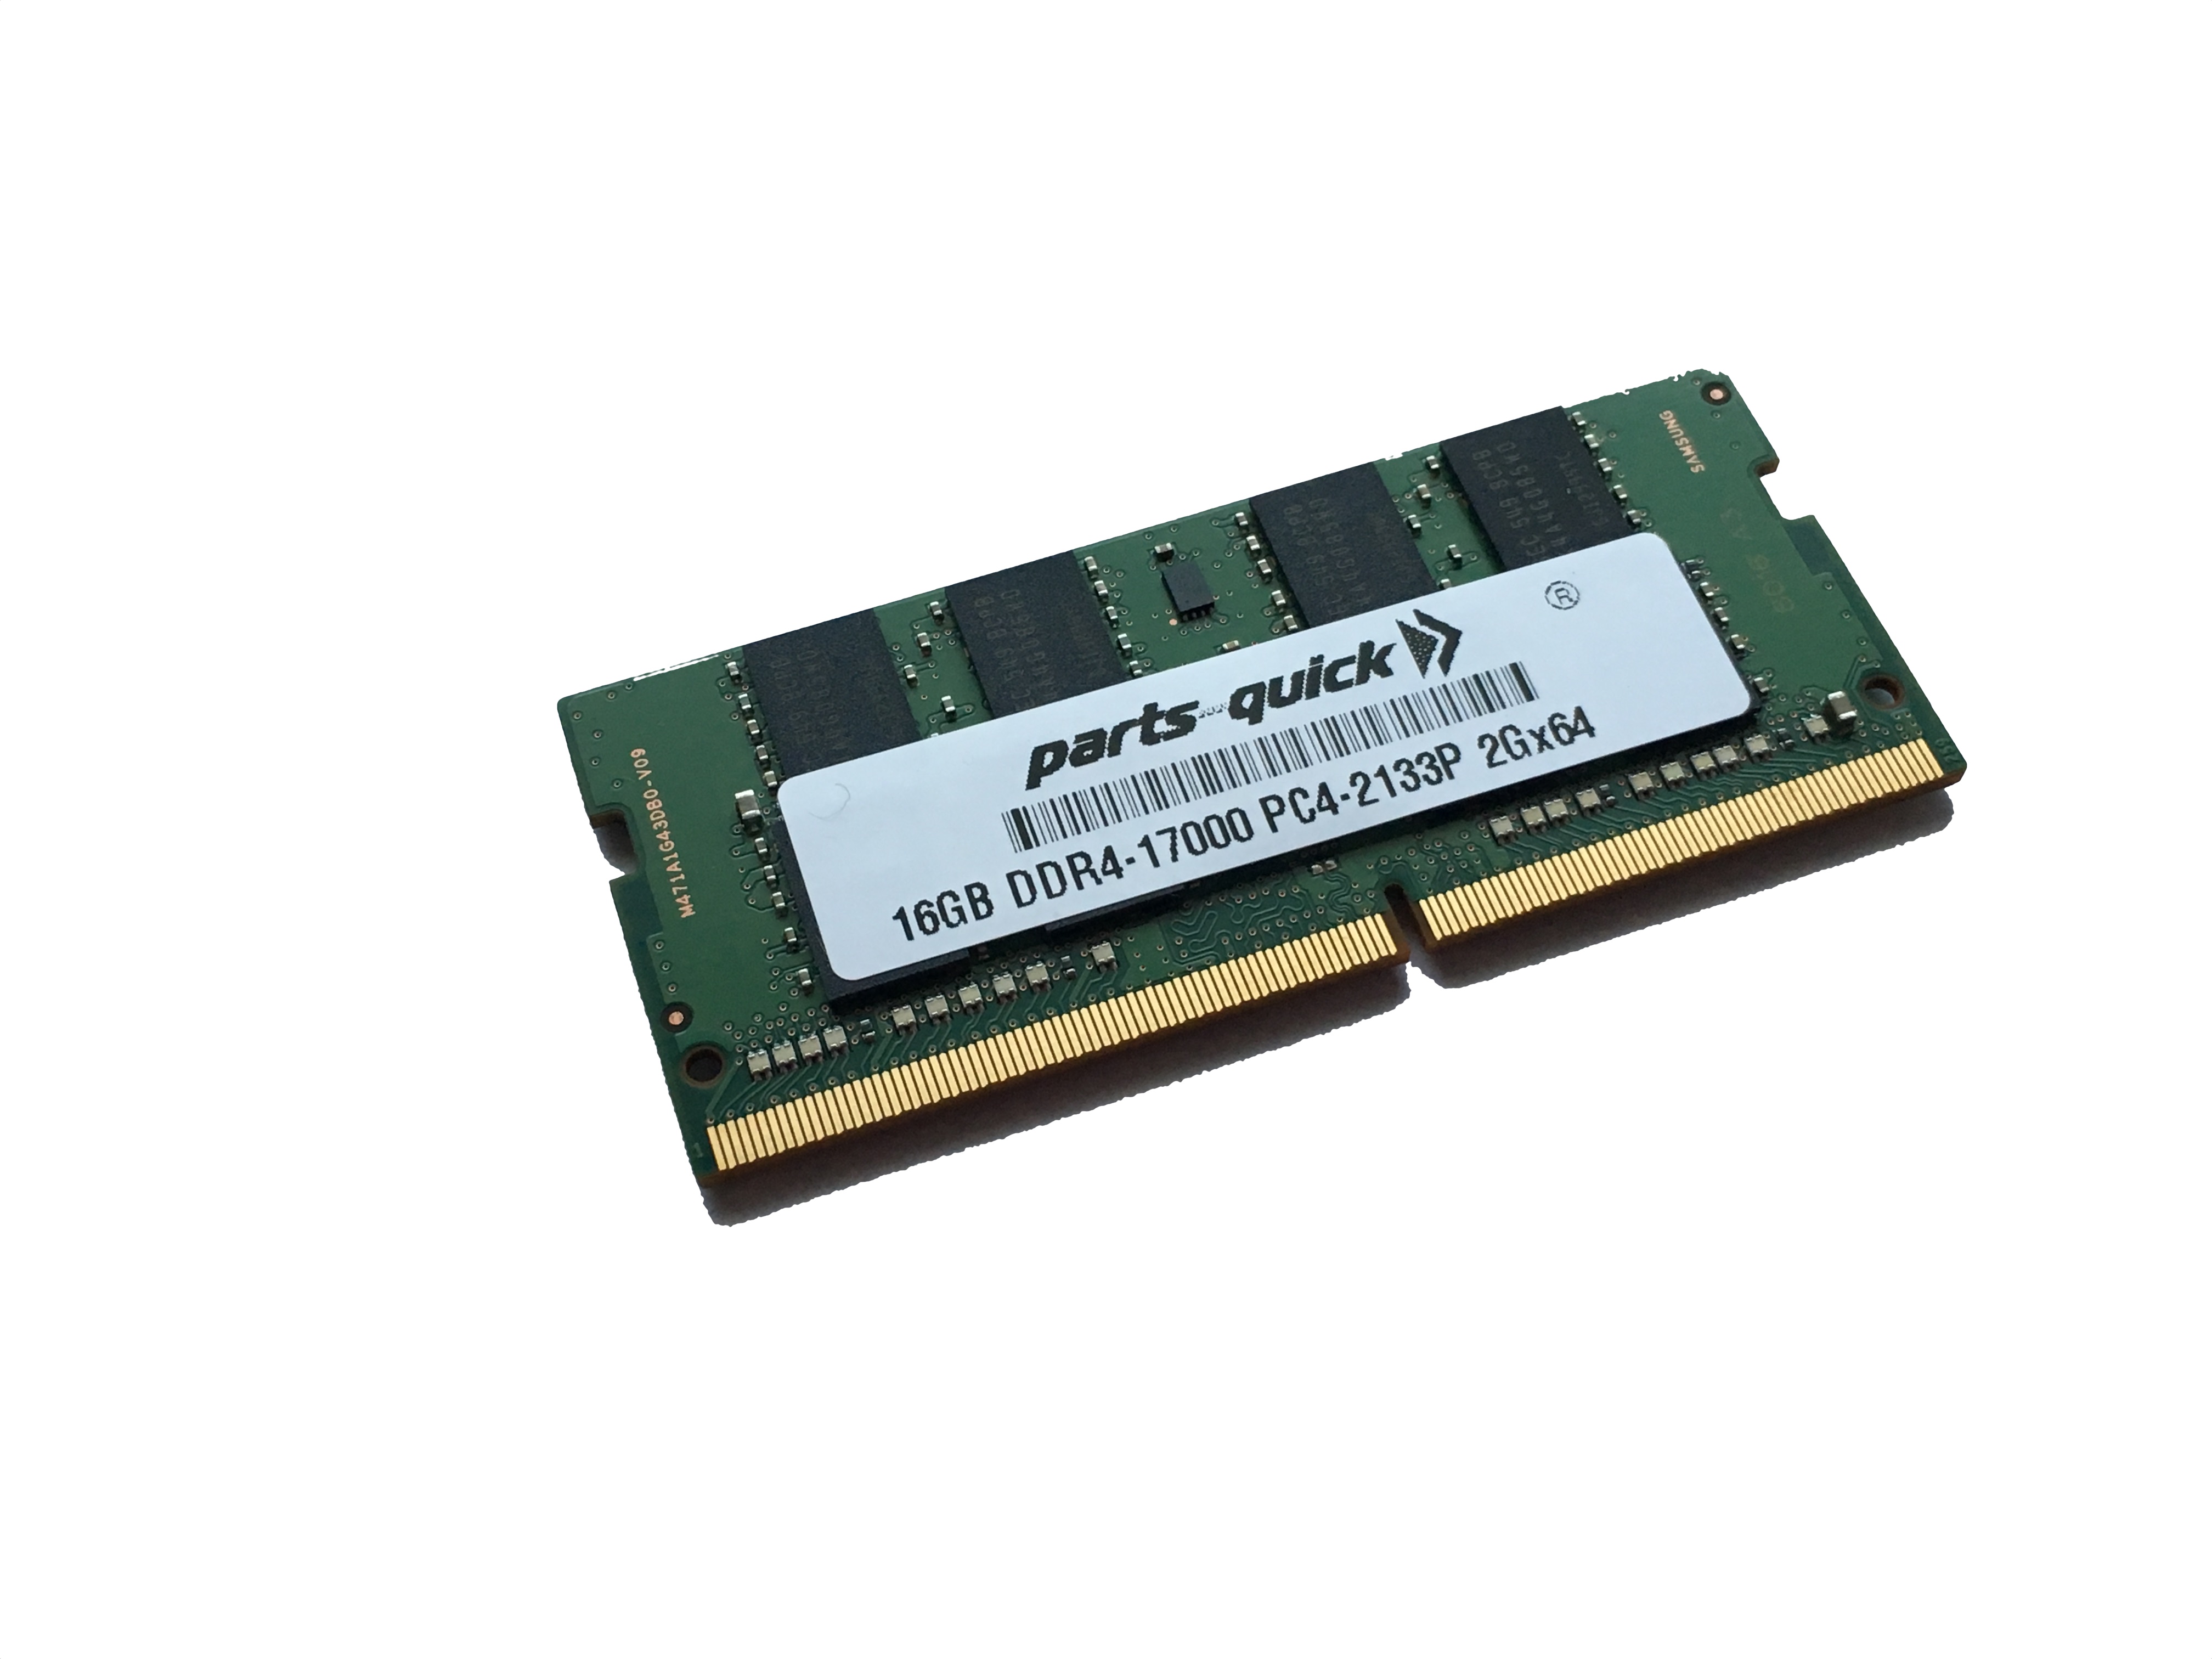 16GB DDR4 RAM Memory Upgrade for Gigabyte (PARTS-QUICK) - image 1 of 1